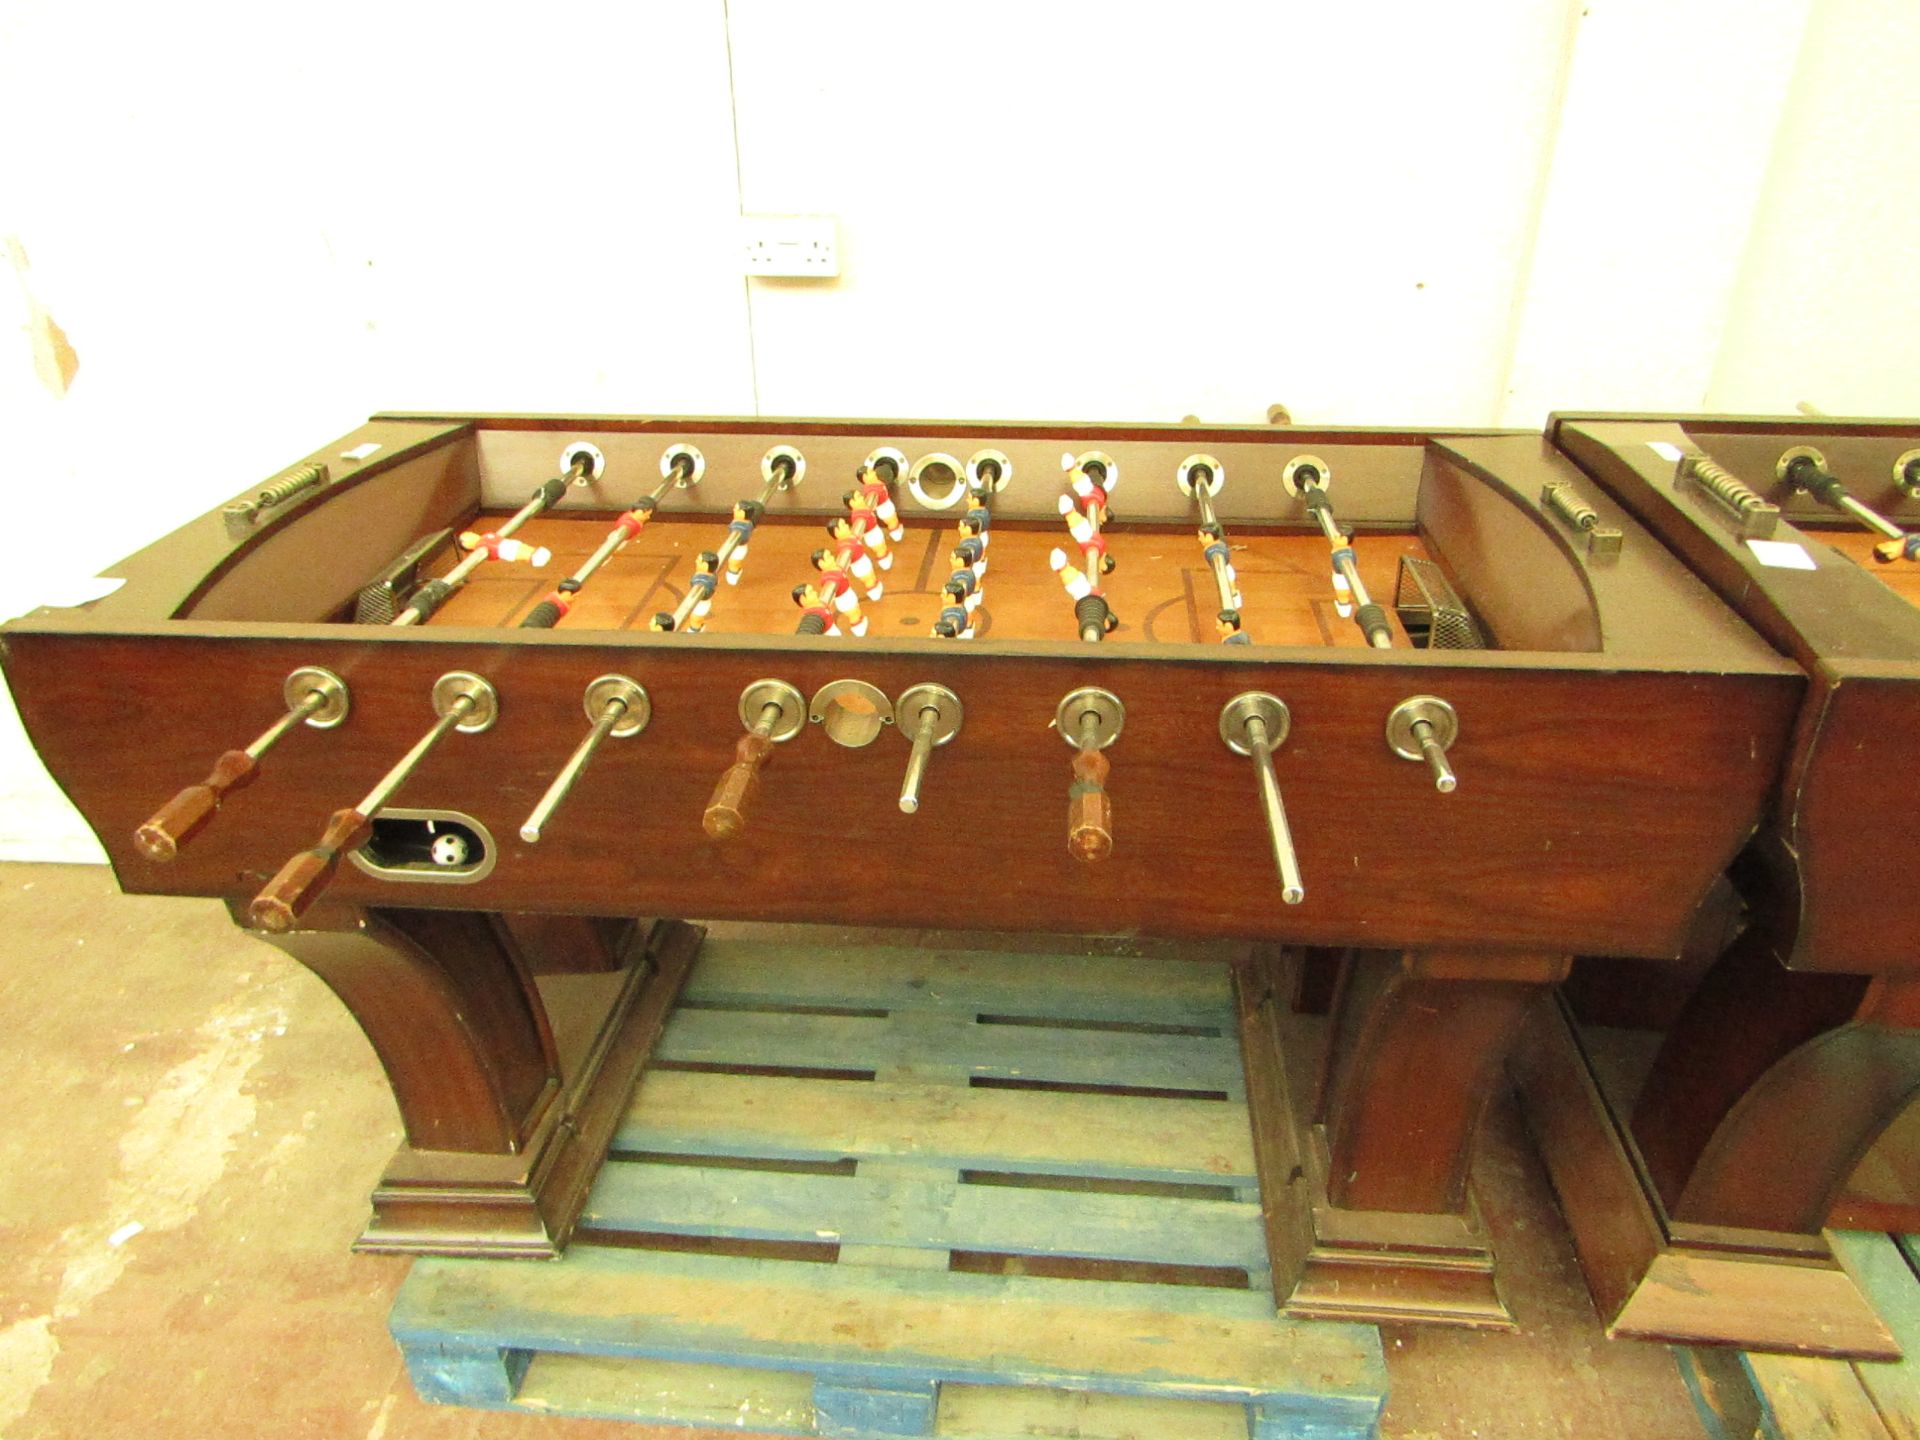 Commercial Quality wooden Foosball table, few marks but everything turns and the ball returns as